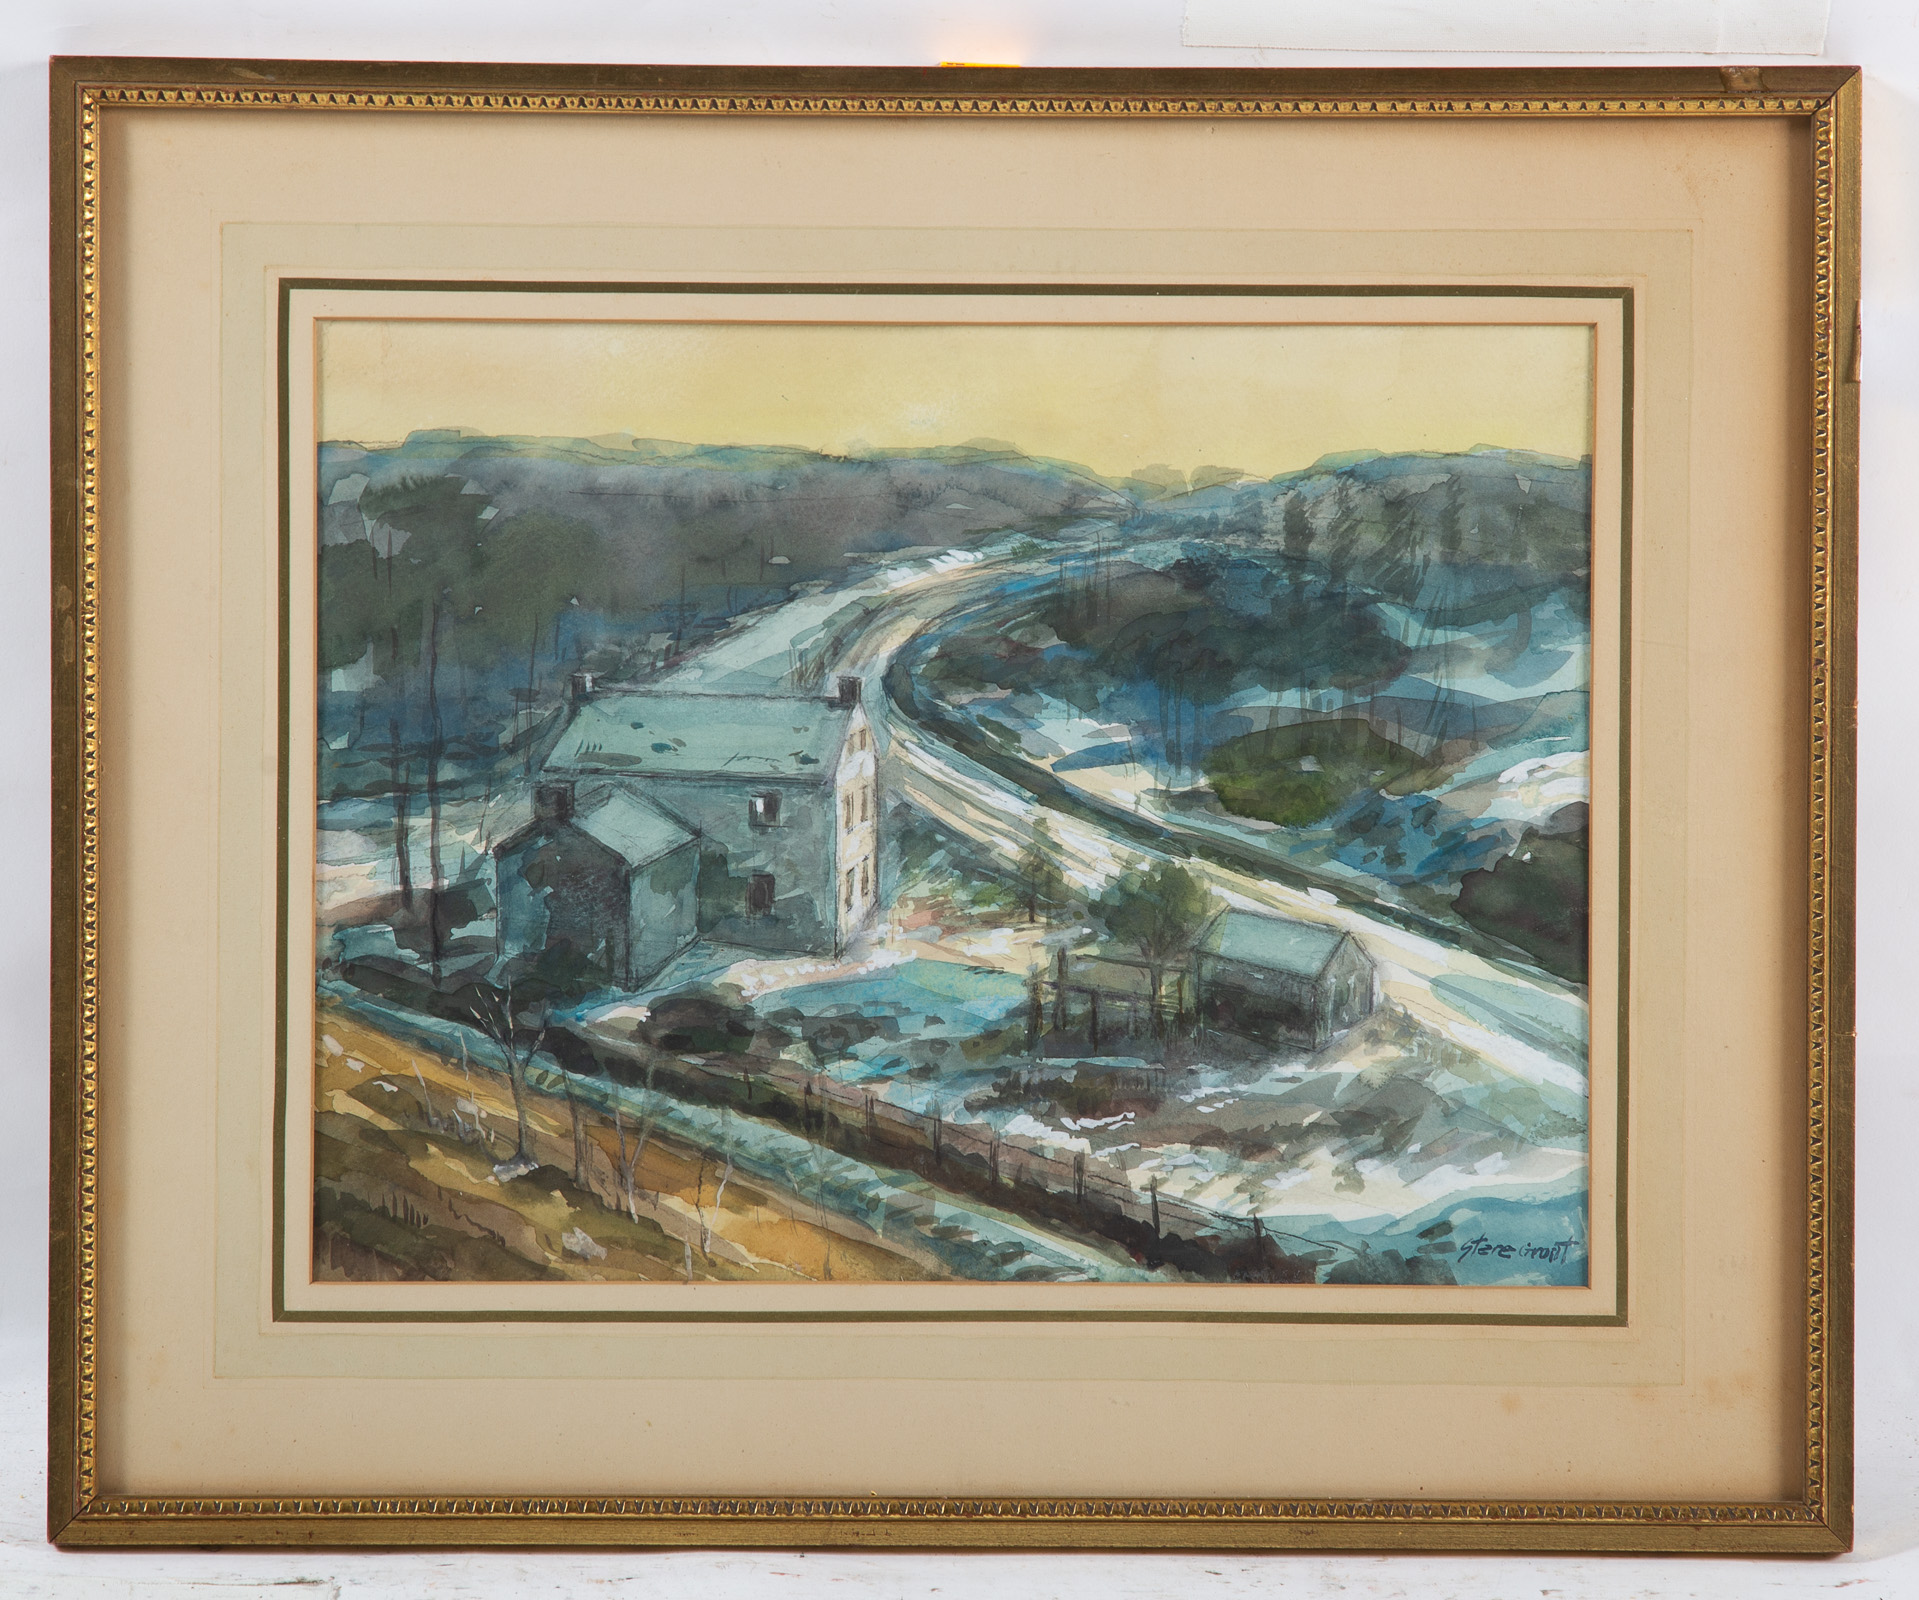 STERE GRANT. "WINTER IN HARFORD